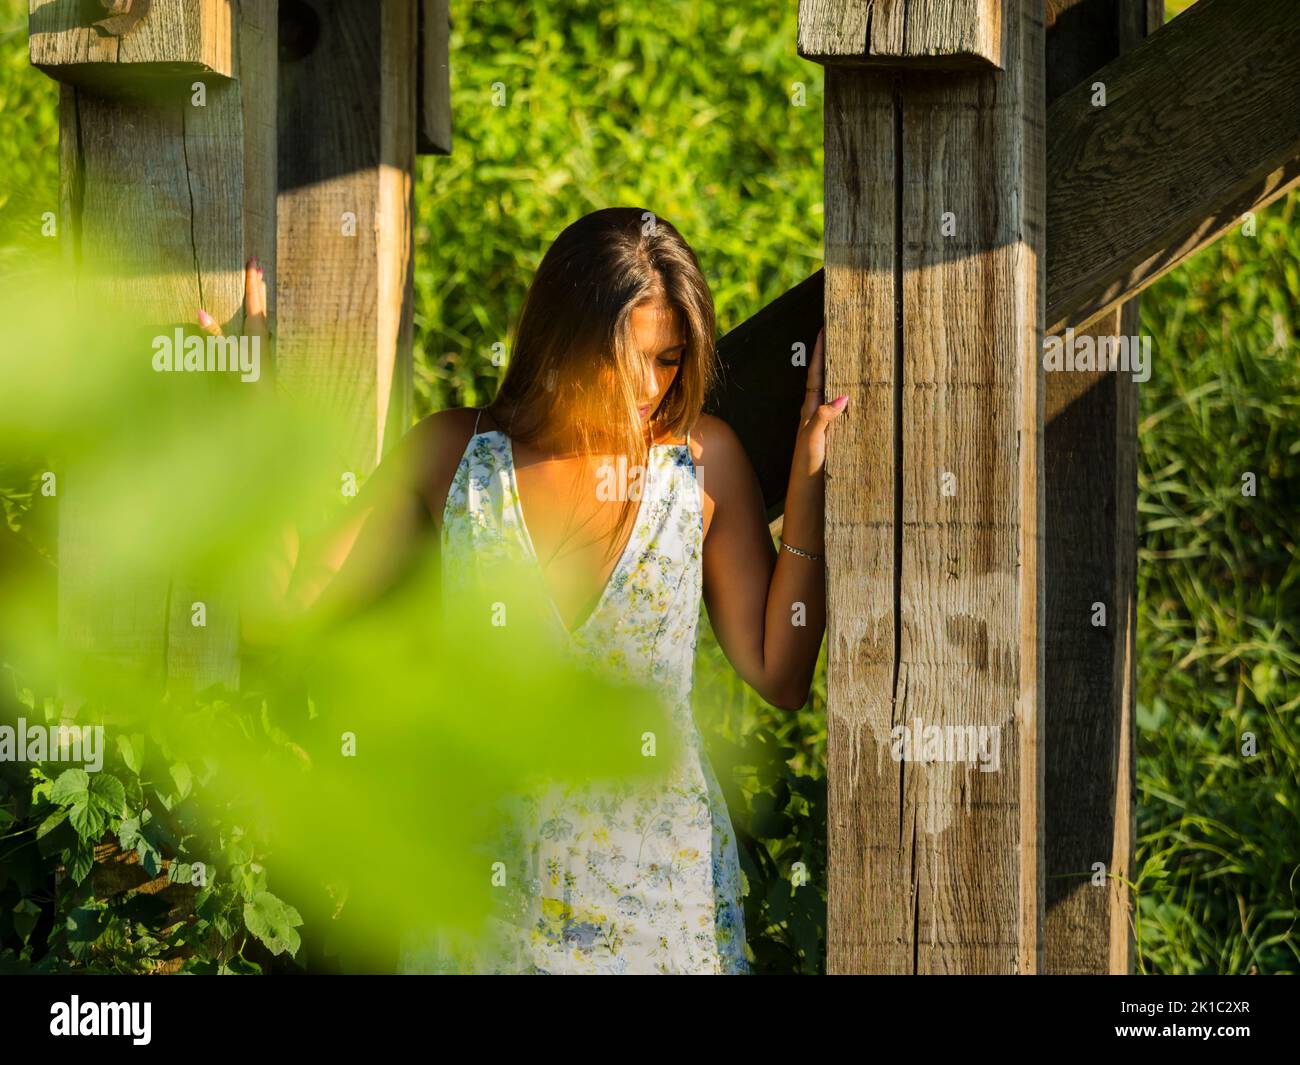 Young woman outside outdoors Stock Photo